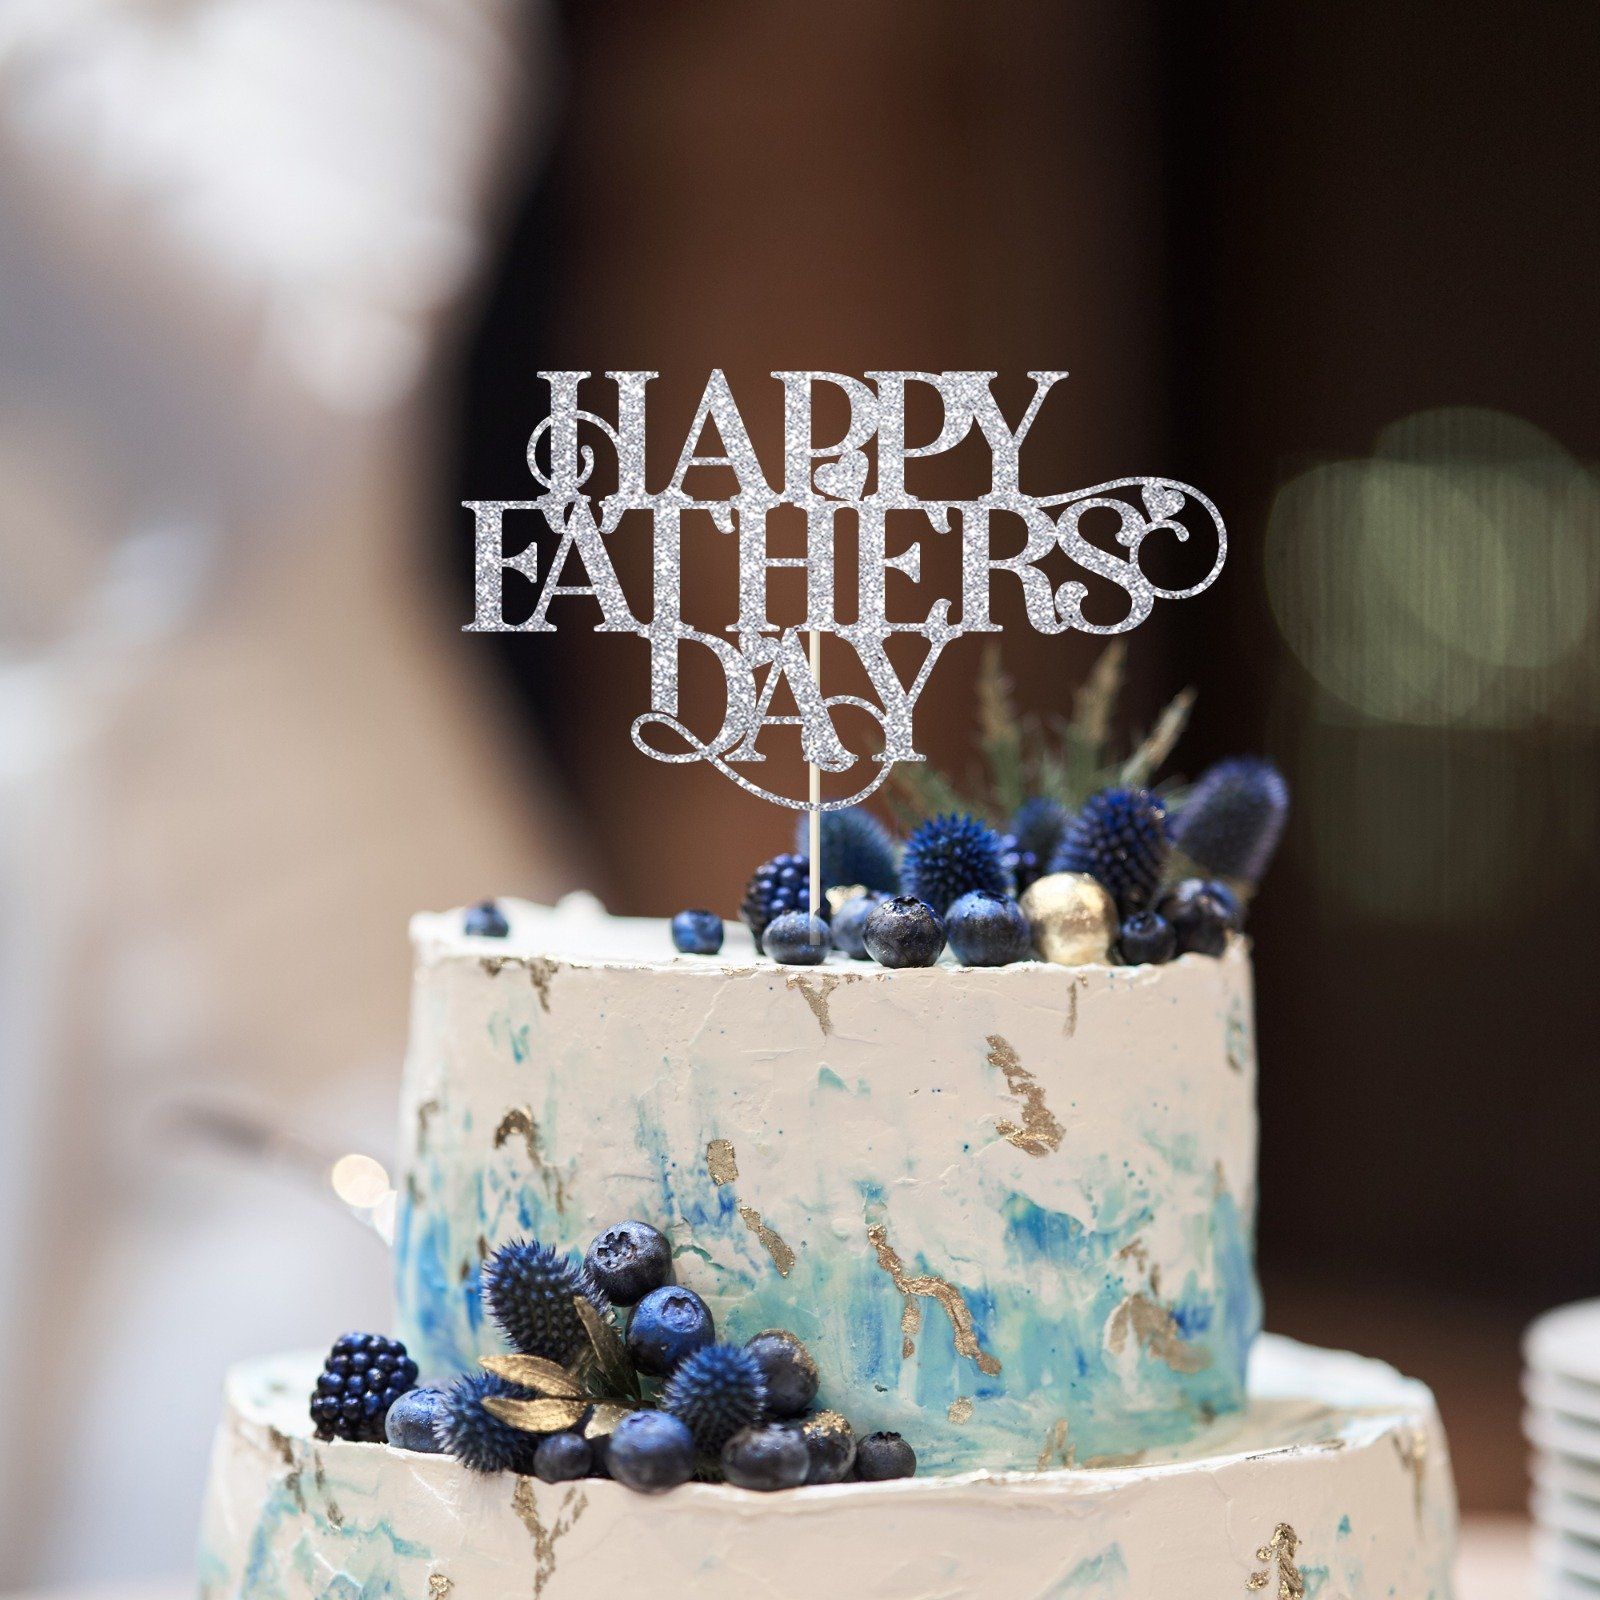 Happy Fathers Day Cake Topper. Father's Day Decoration